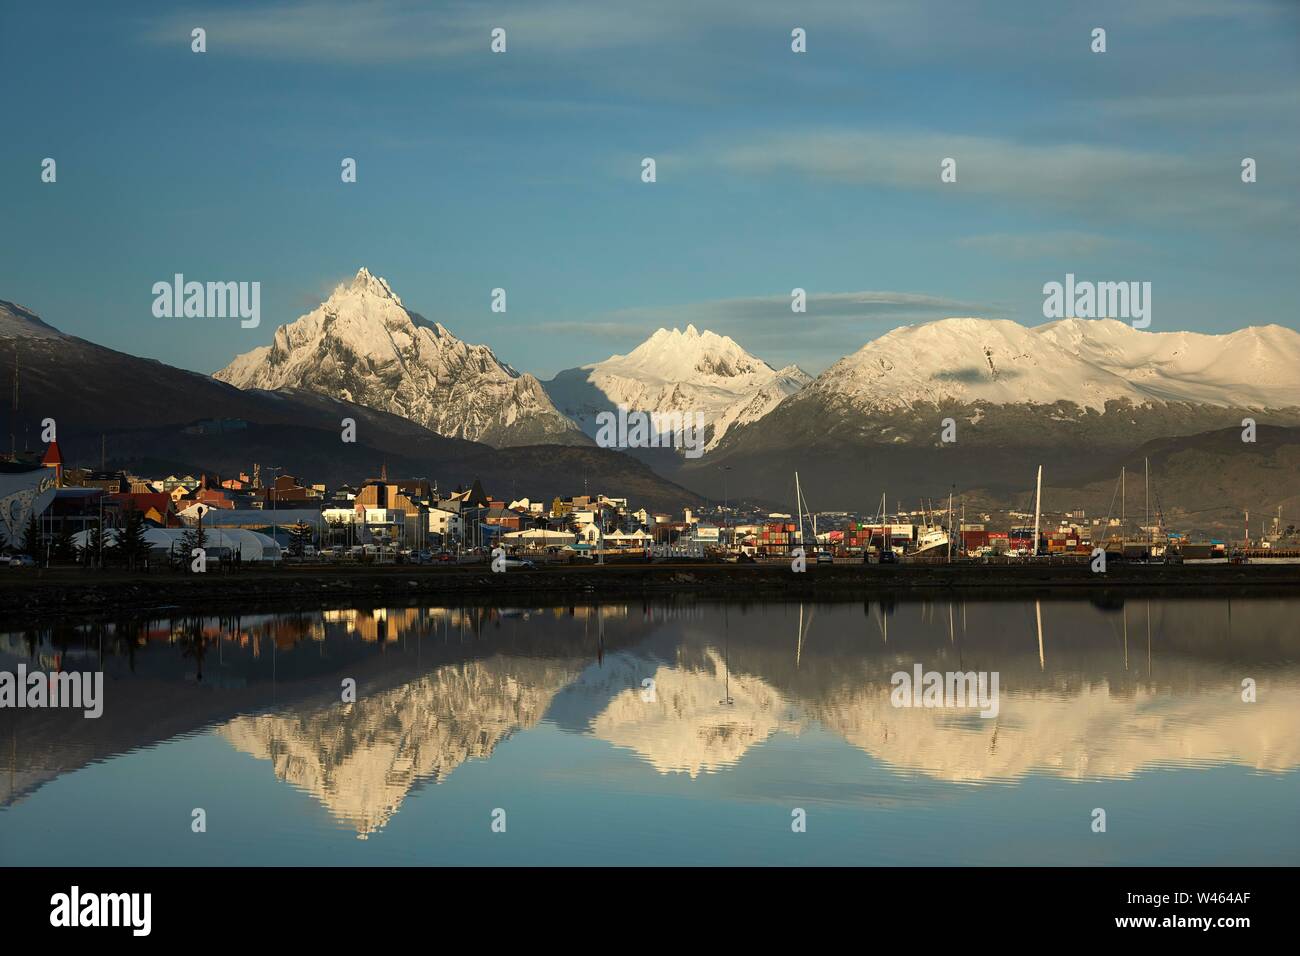 City view with reflection in the water, behind snow-covered Andes with Monte Olivia, Ushuaia, Tierra del Fuego, Argentina Stock Photo